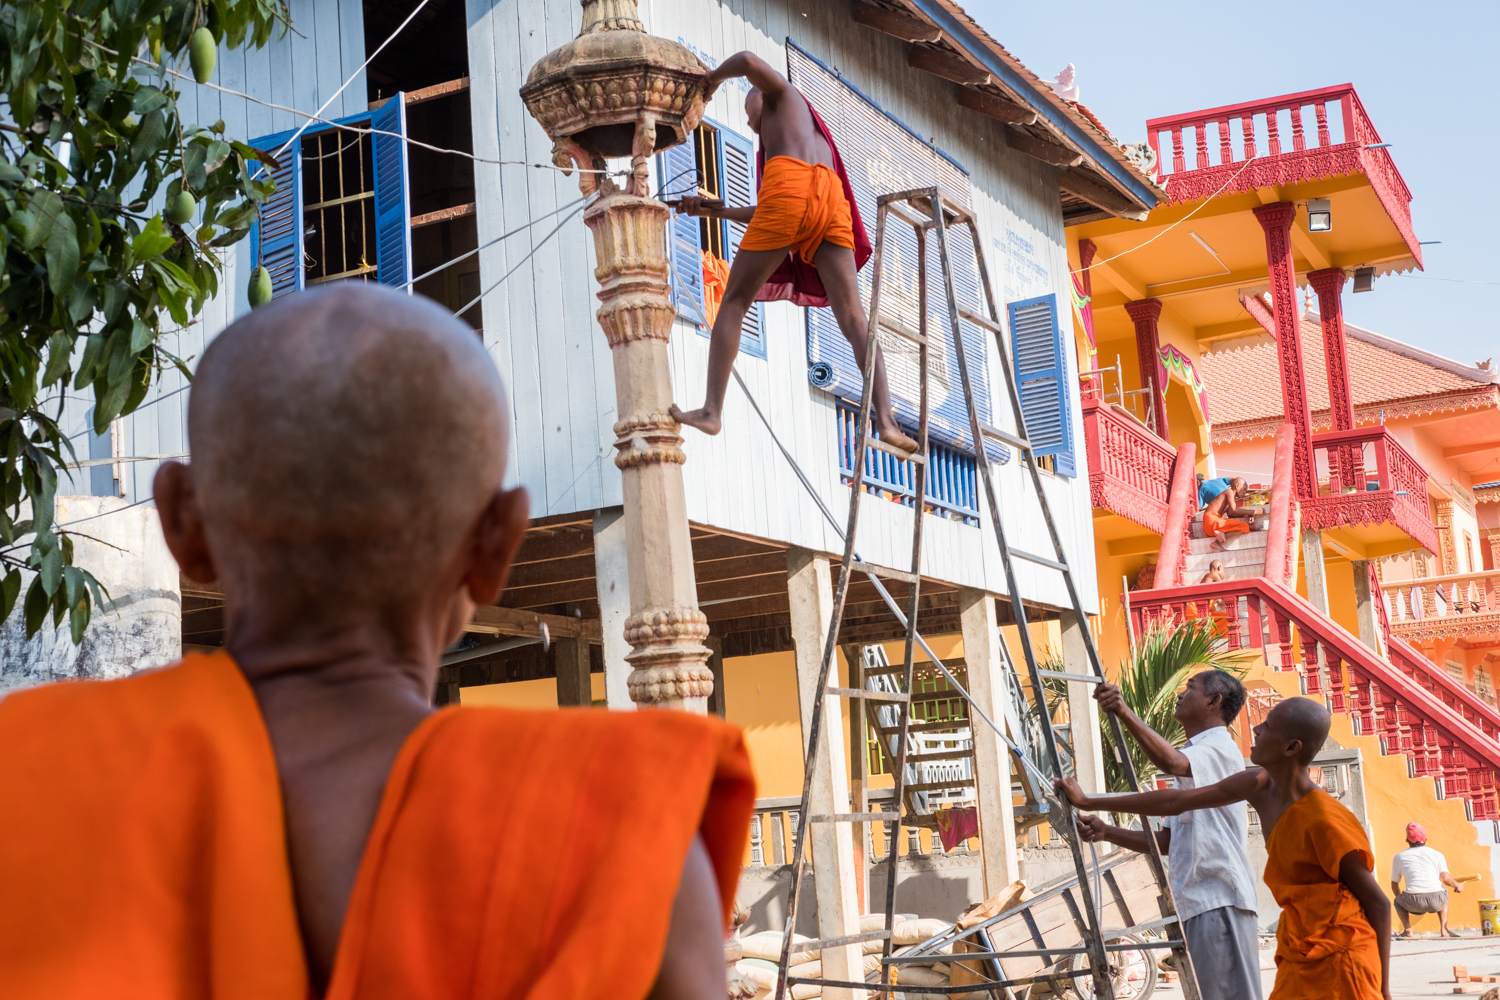  A group of monks perform construction activities outside their temple in Angkor Ban, Cambodia. 